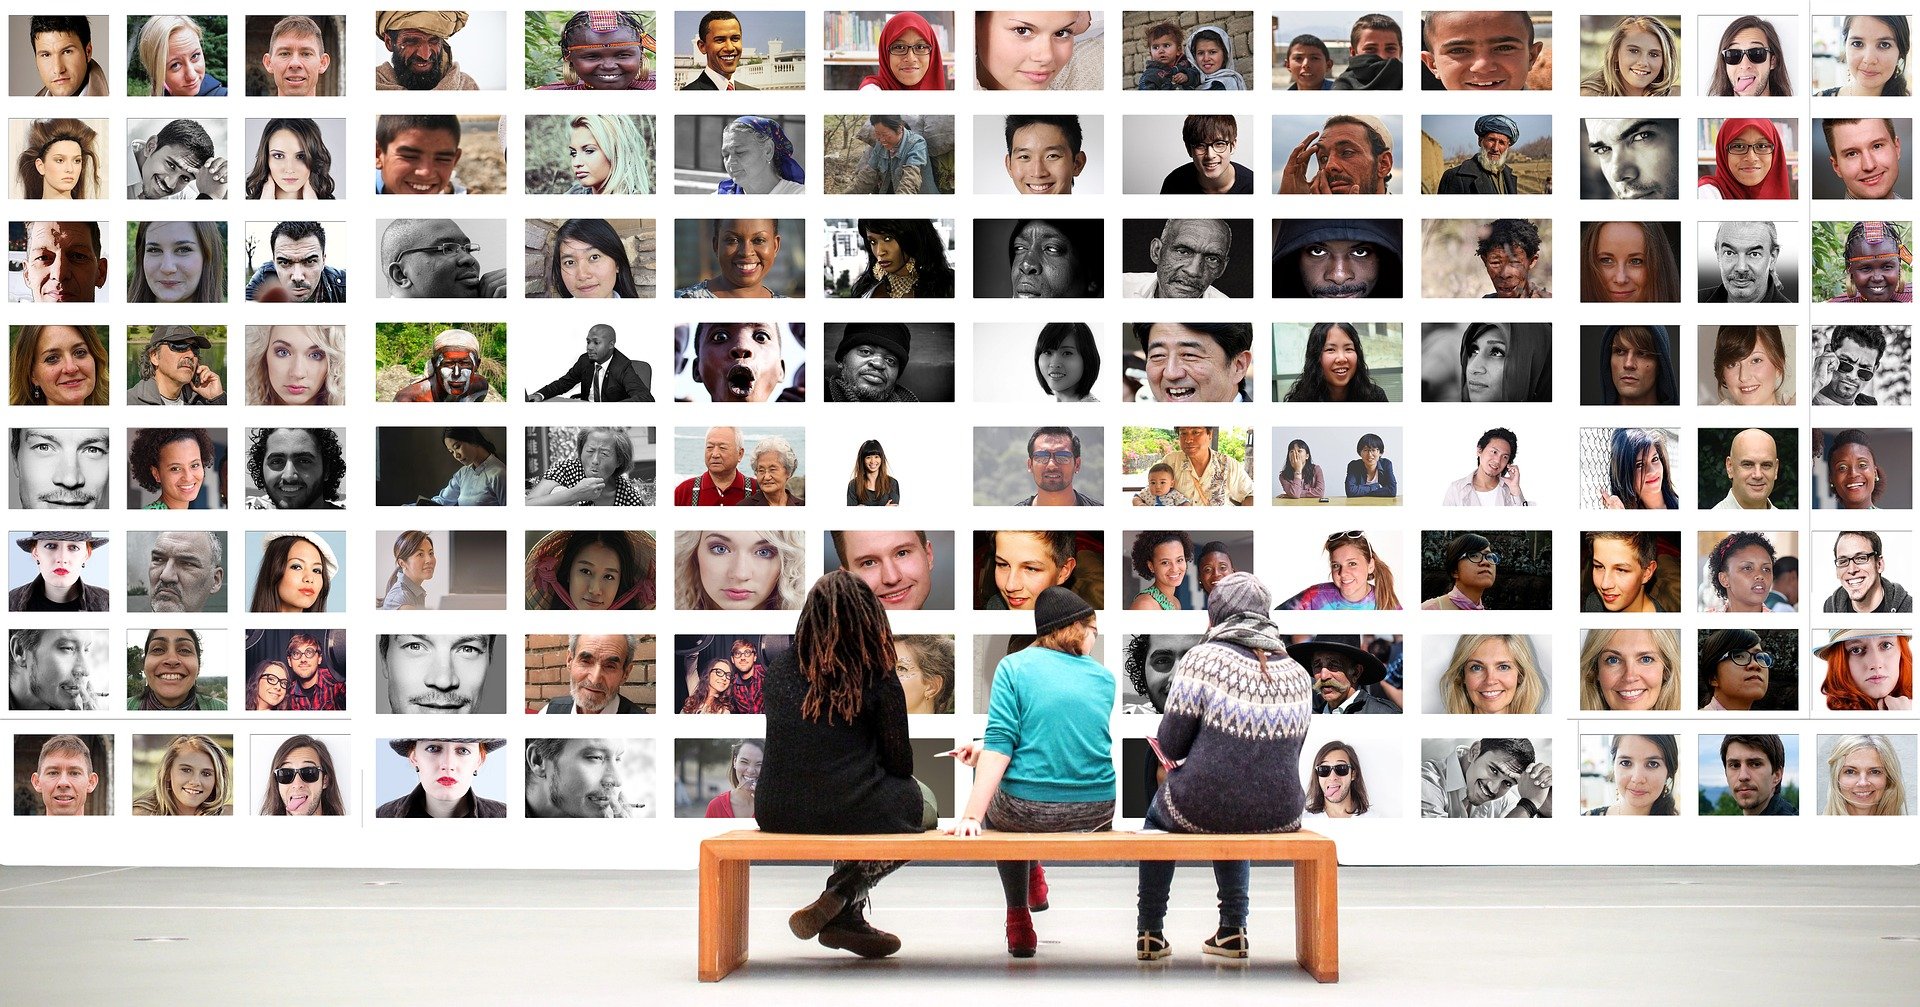 Three people sitting on a bench looking at a large collage of profile pictures of diverse people